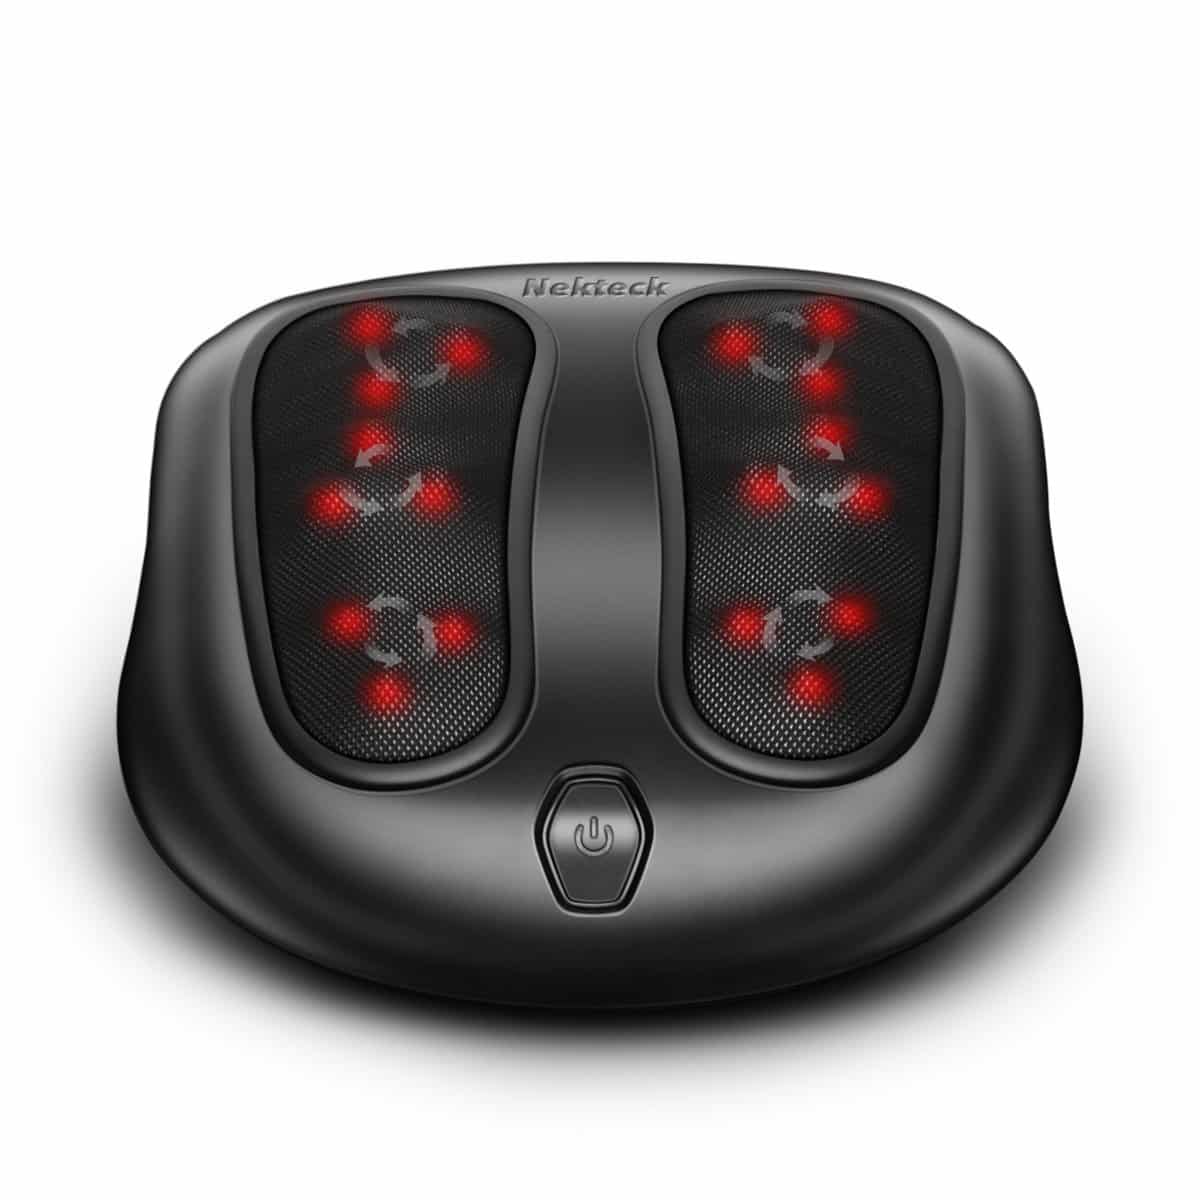 5 Best Foot Massagers In 2020 Reviews And Guide